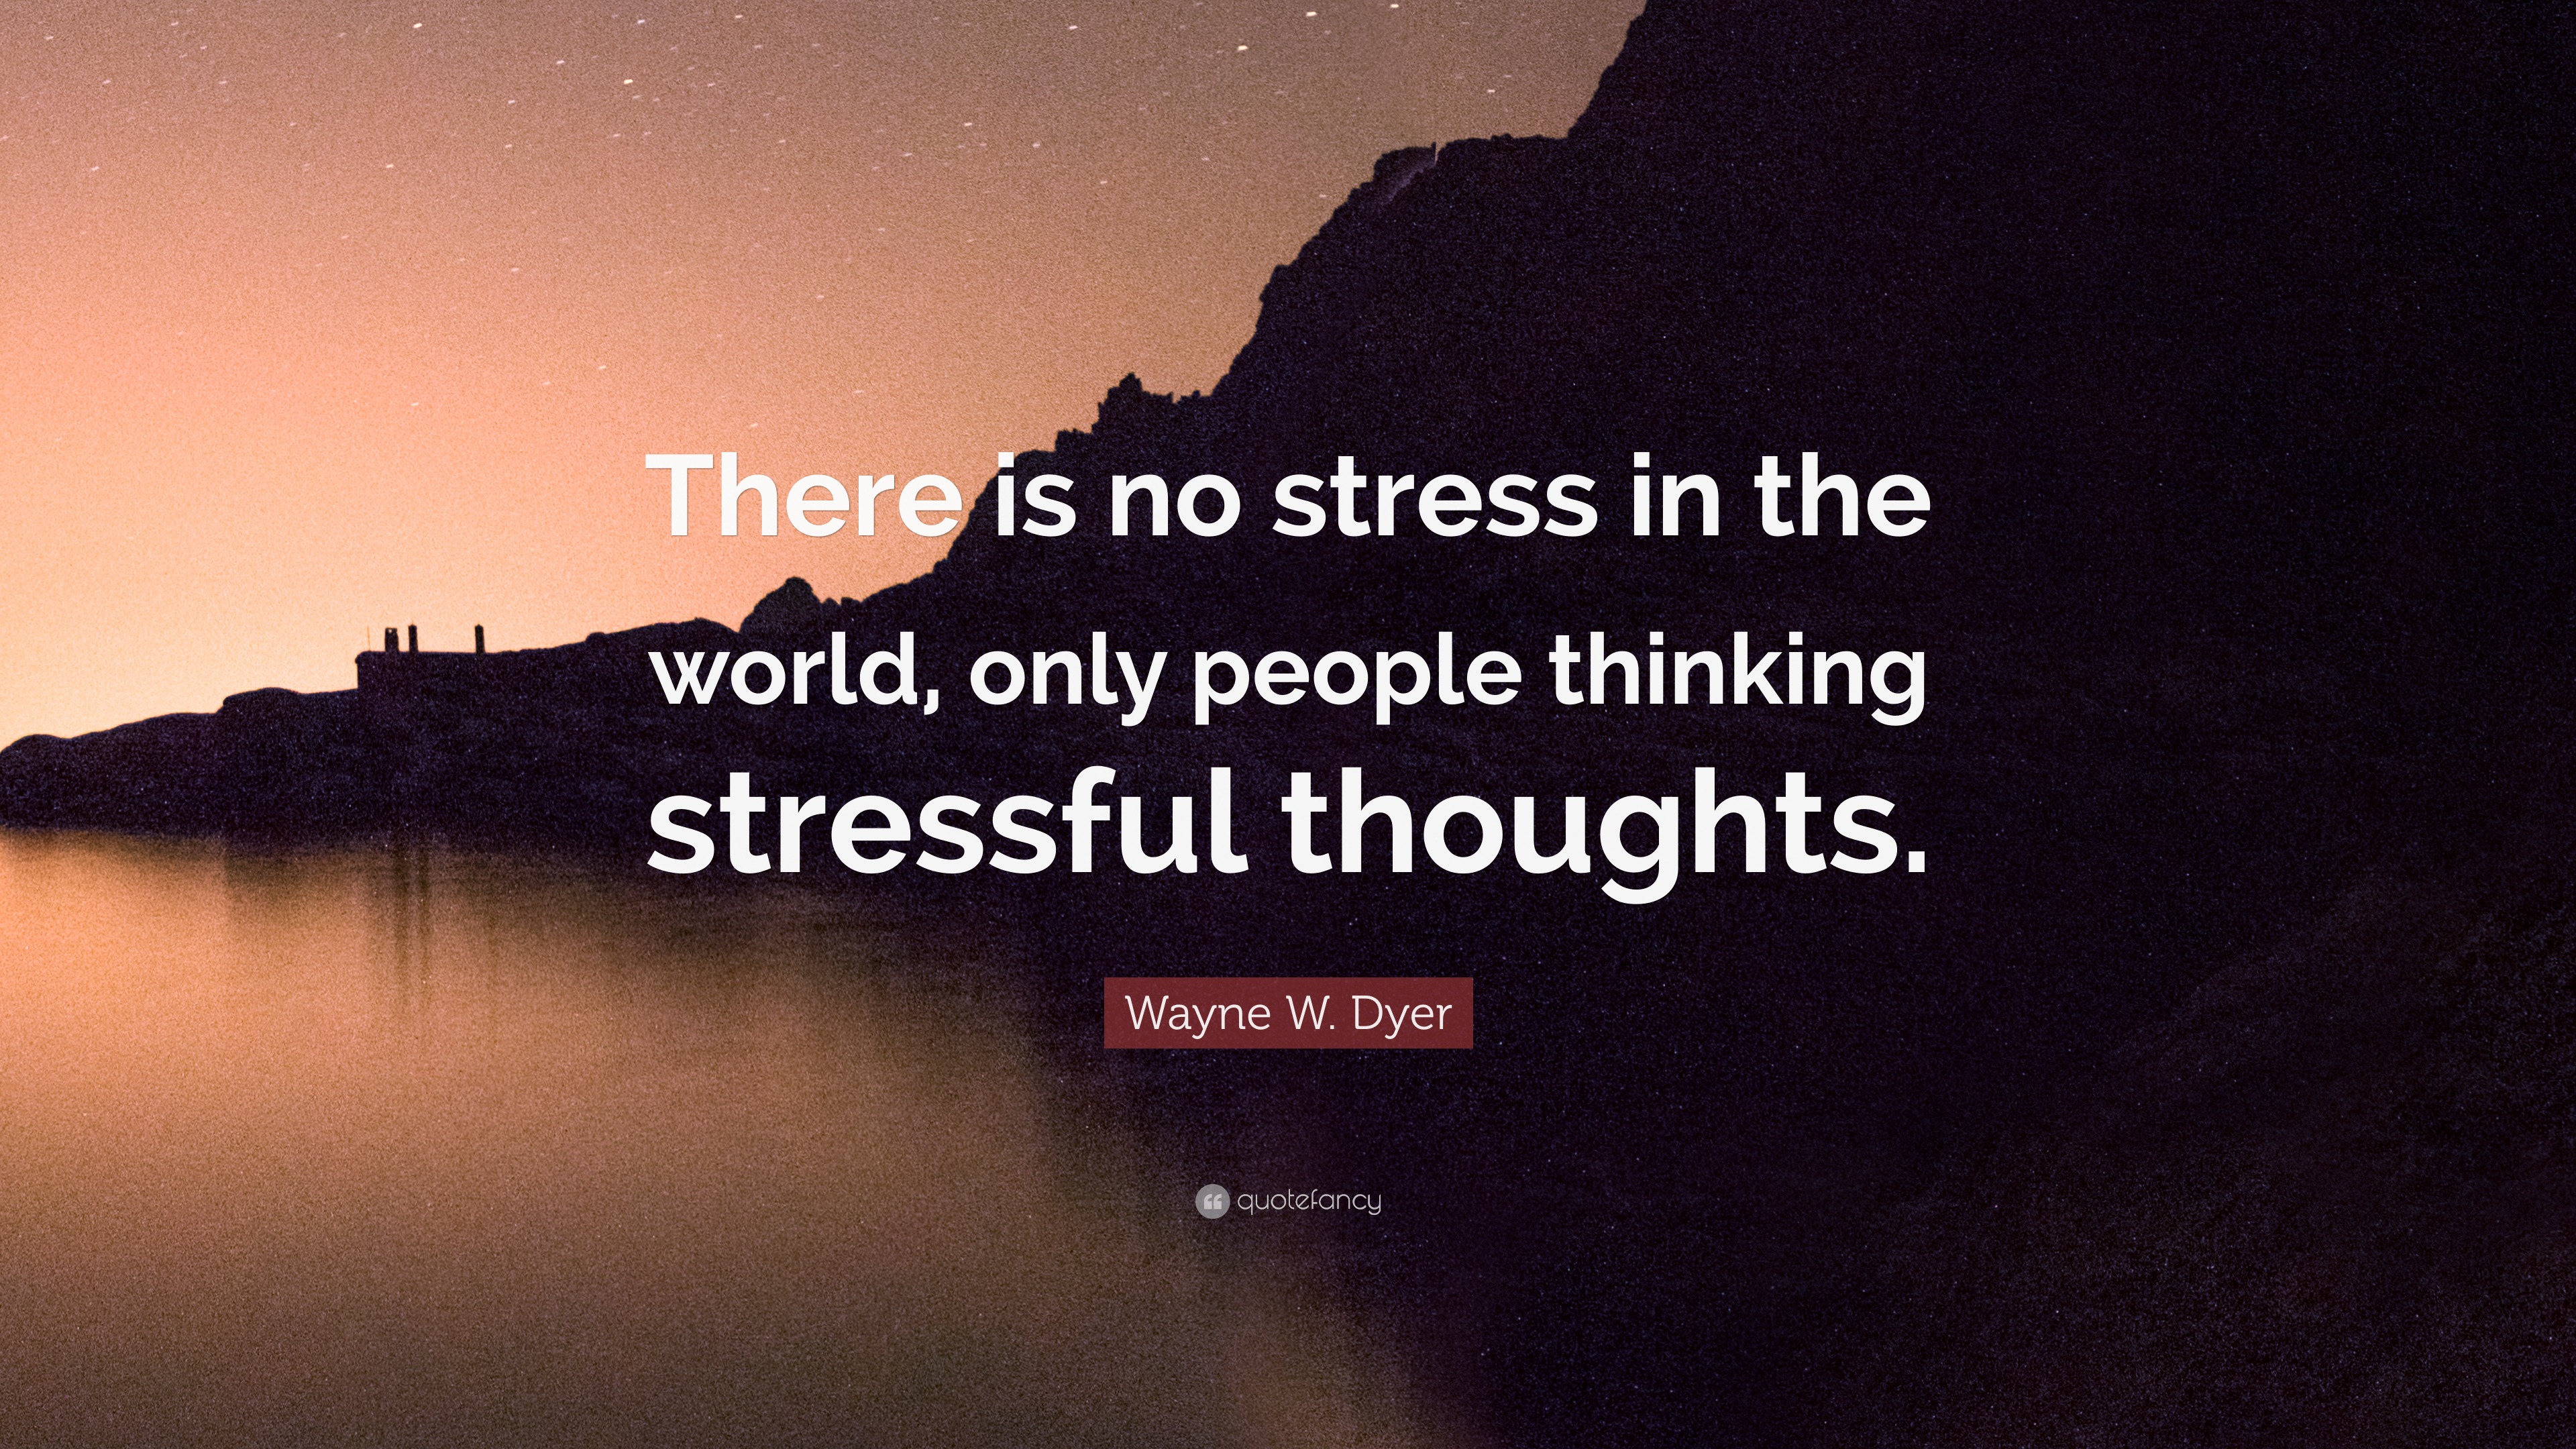 Wayne W. Dyer Quote: “There is no stress in the world, only people